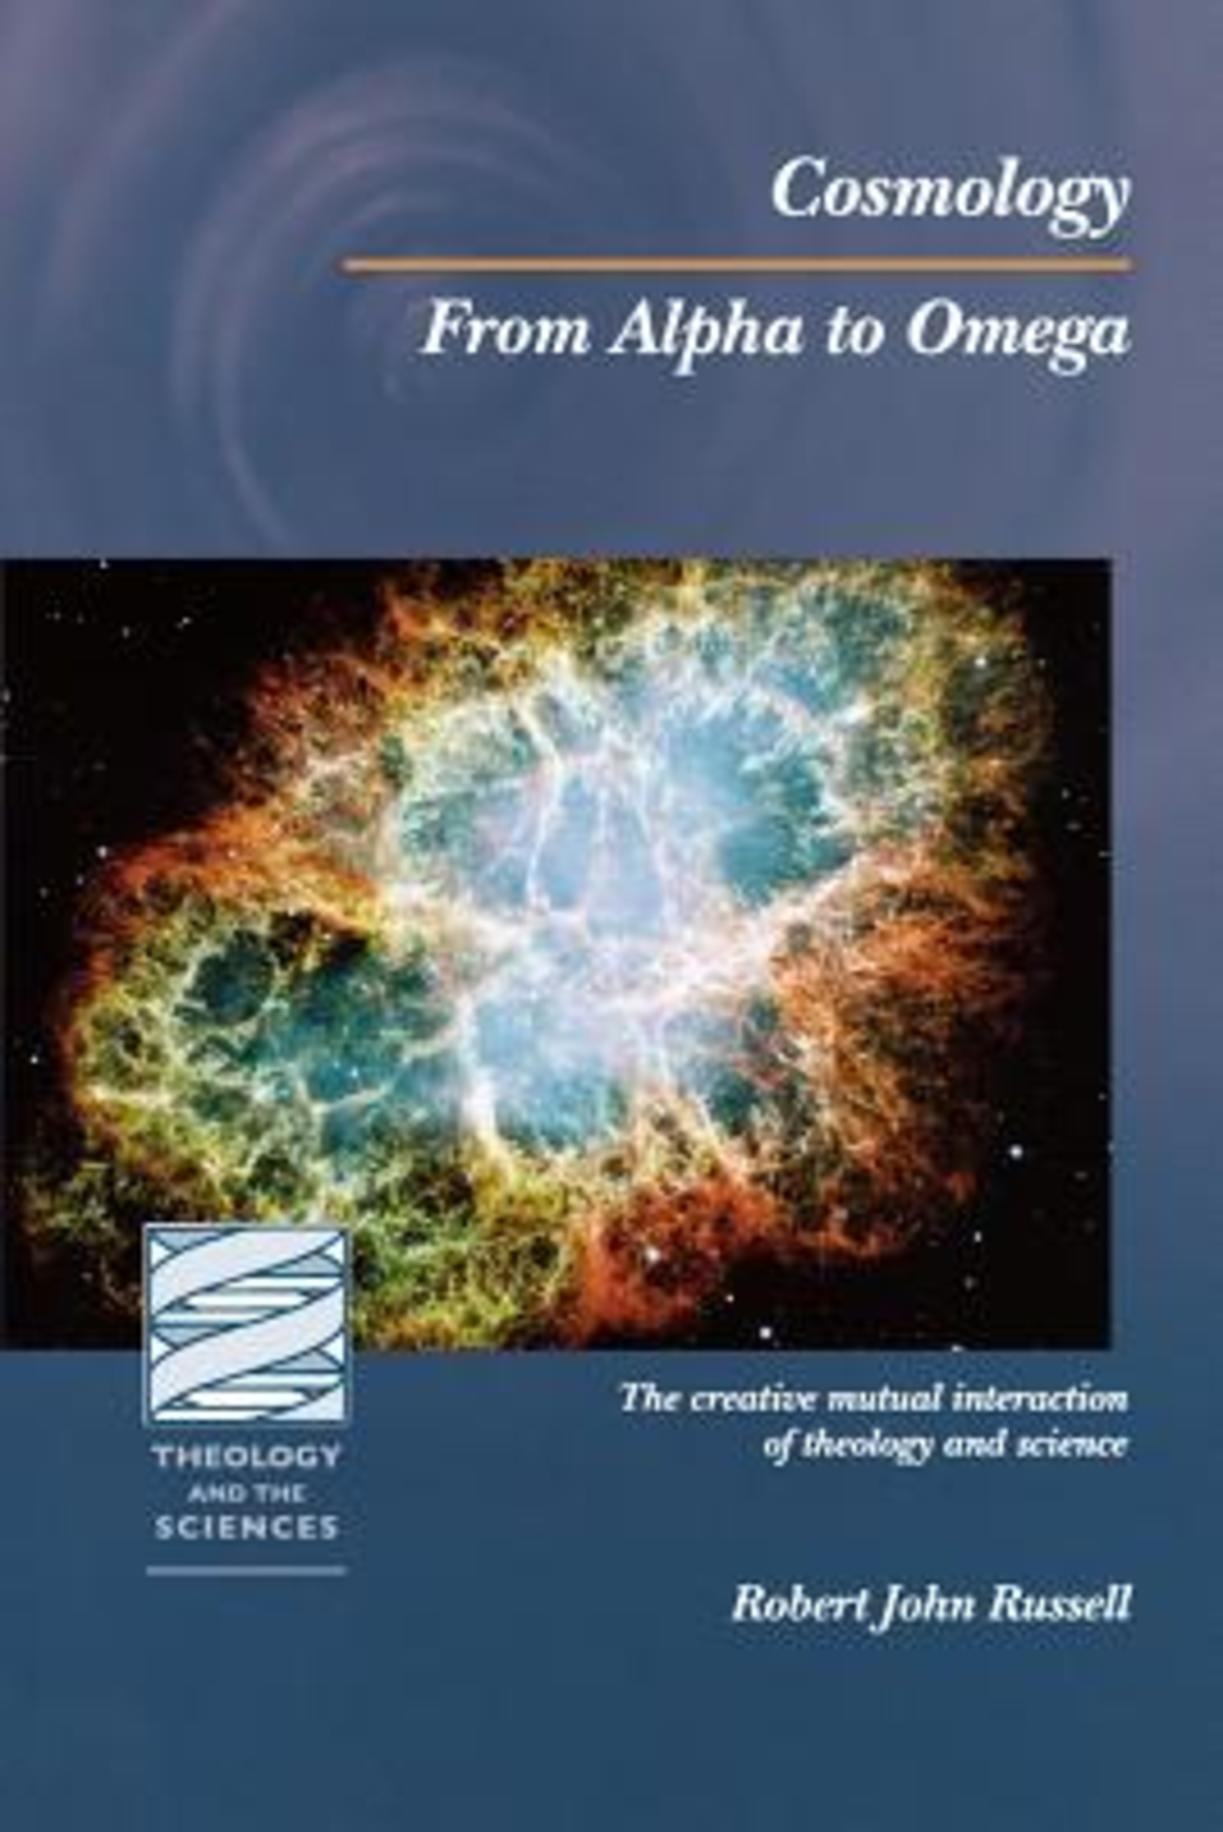 Cosmology (From Alpha to Omega)